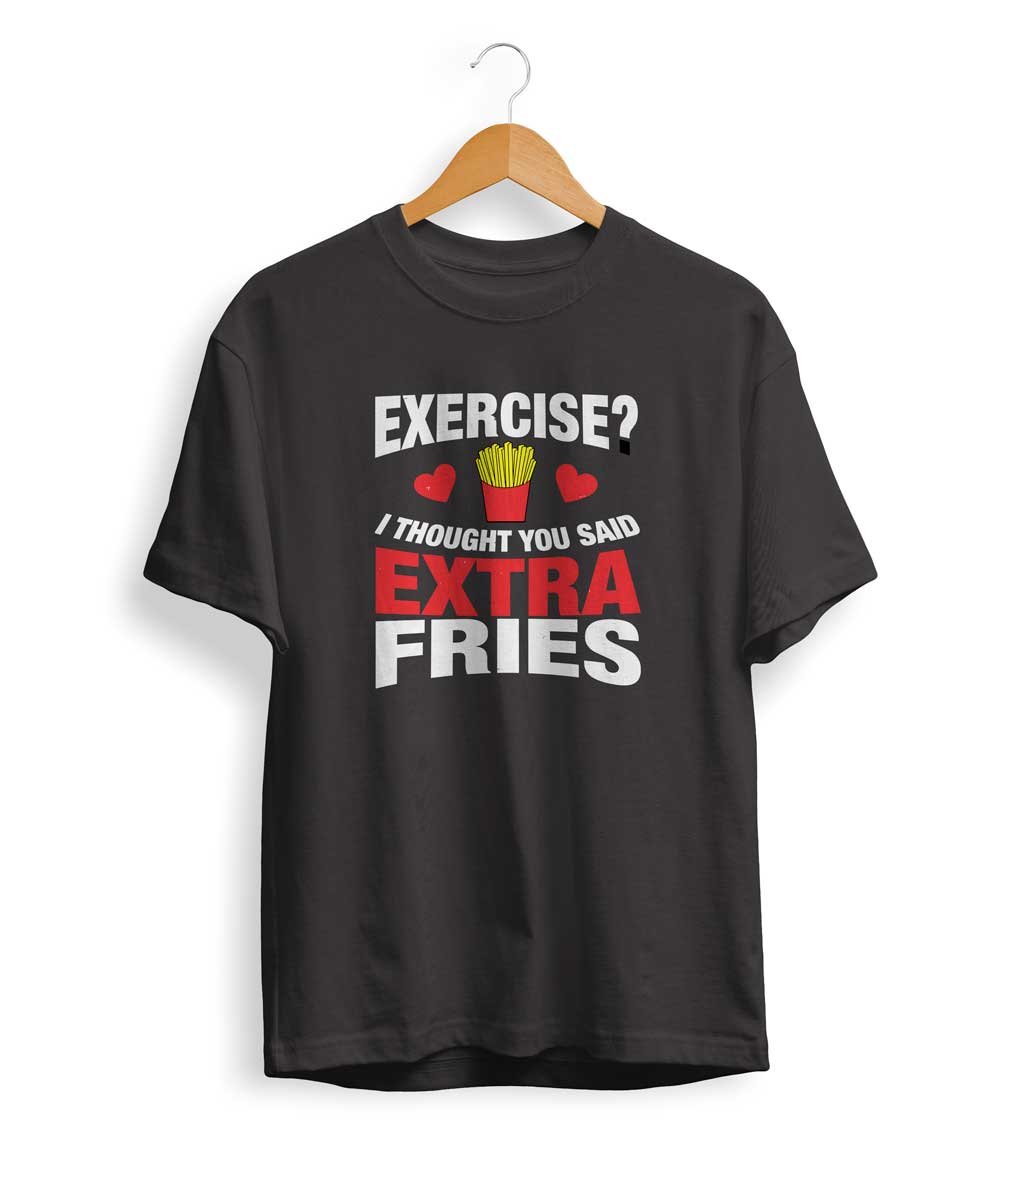 Execise? I thought you said extra fries T Shirt